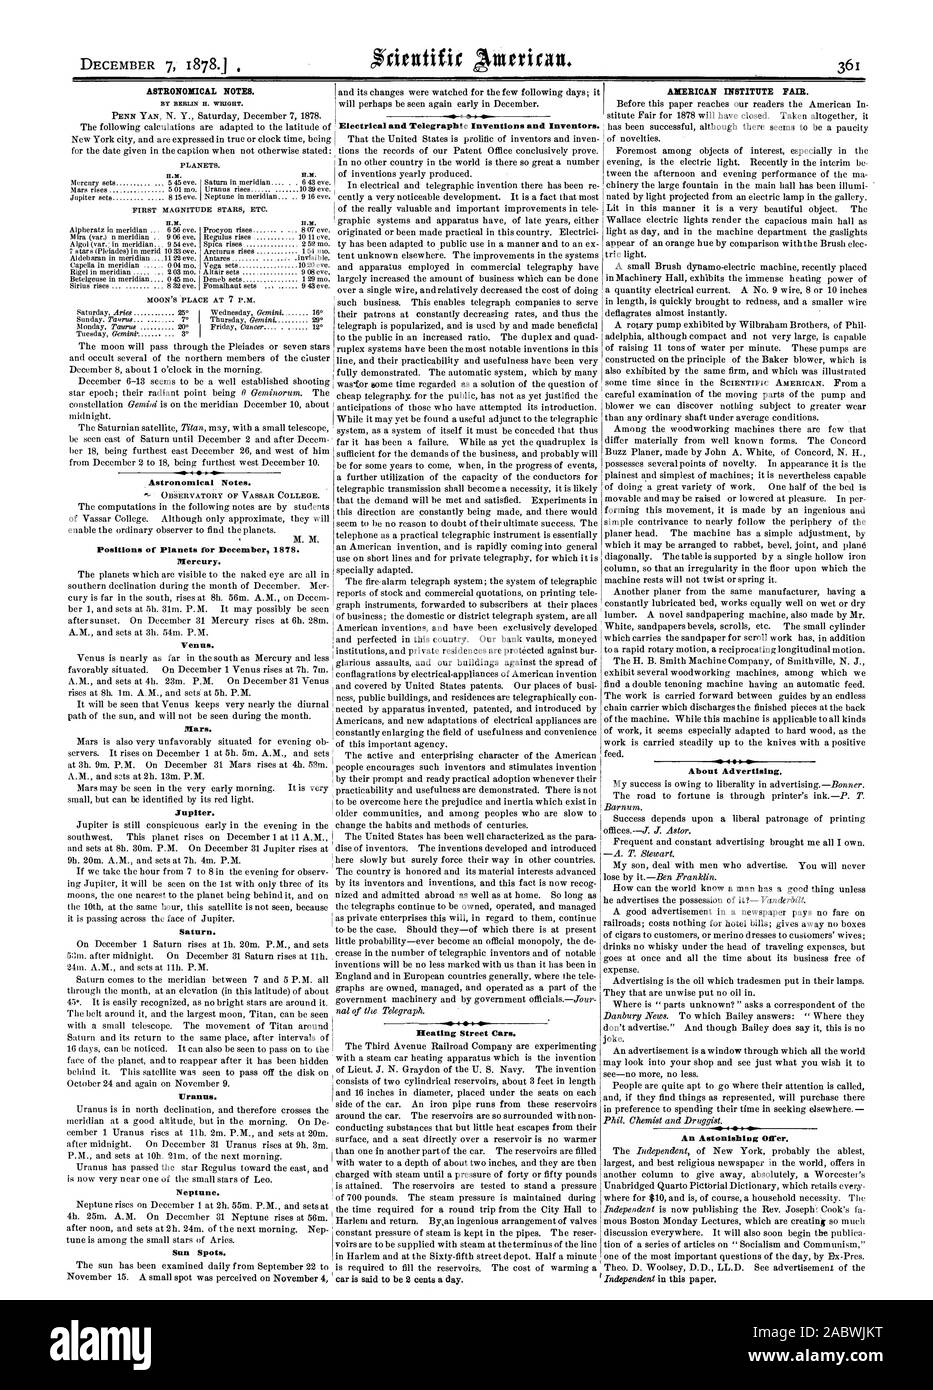 Heating Street Cars. ASTRONOMICAL NOTES. BY BERLIN H. WRIGHT. H.)!. Astronomical Notes. Positions of Planets for December 1878. Mercury. Venus. Mars. Jupiter. Saturn. Uranus. Neptune. Sun Spots. AMERICAN INSTITUTE FAIR. About Advertising. 4  Electrical and Telegraphic Inventions and Inventors., scientific american, 1878-12-07 Stock Photo